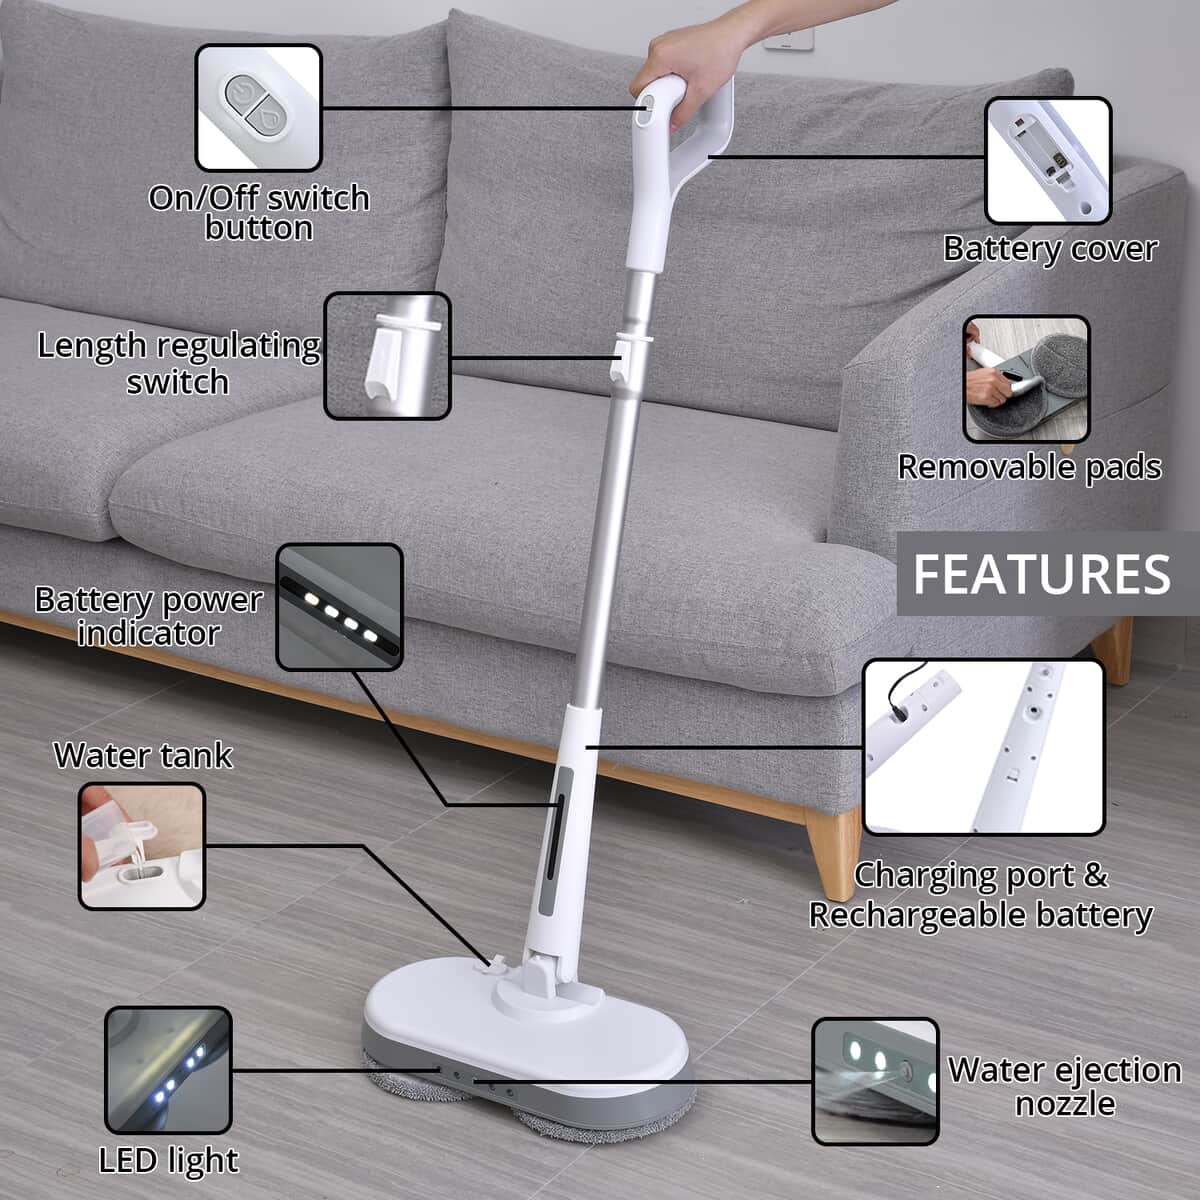 Homesmart White and Gray Cordless Electric Spin Mop with 280ml Water Tank and Built-in 4 LED Light image number 2